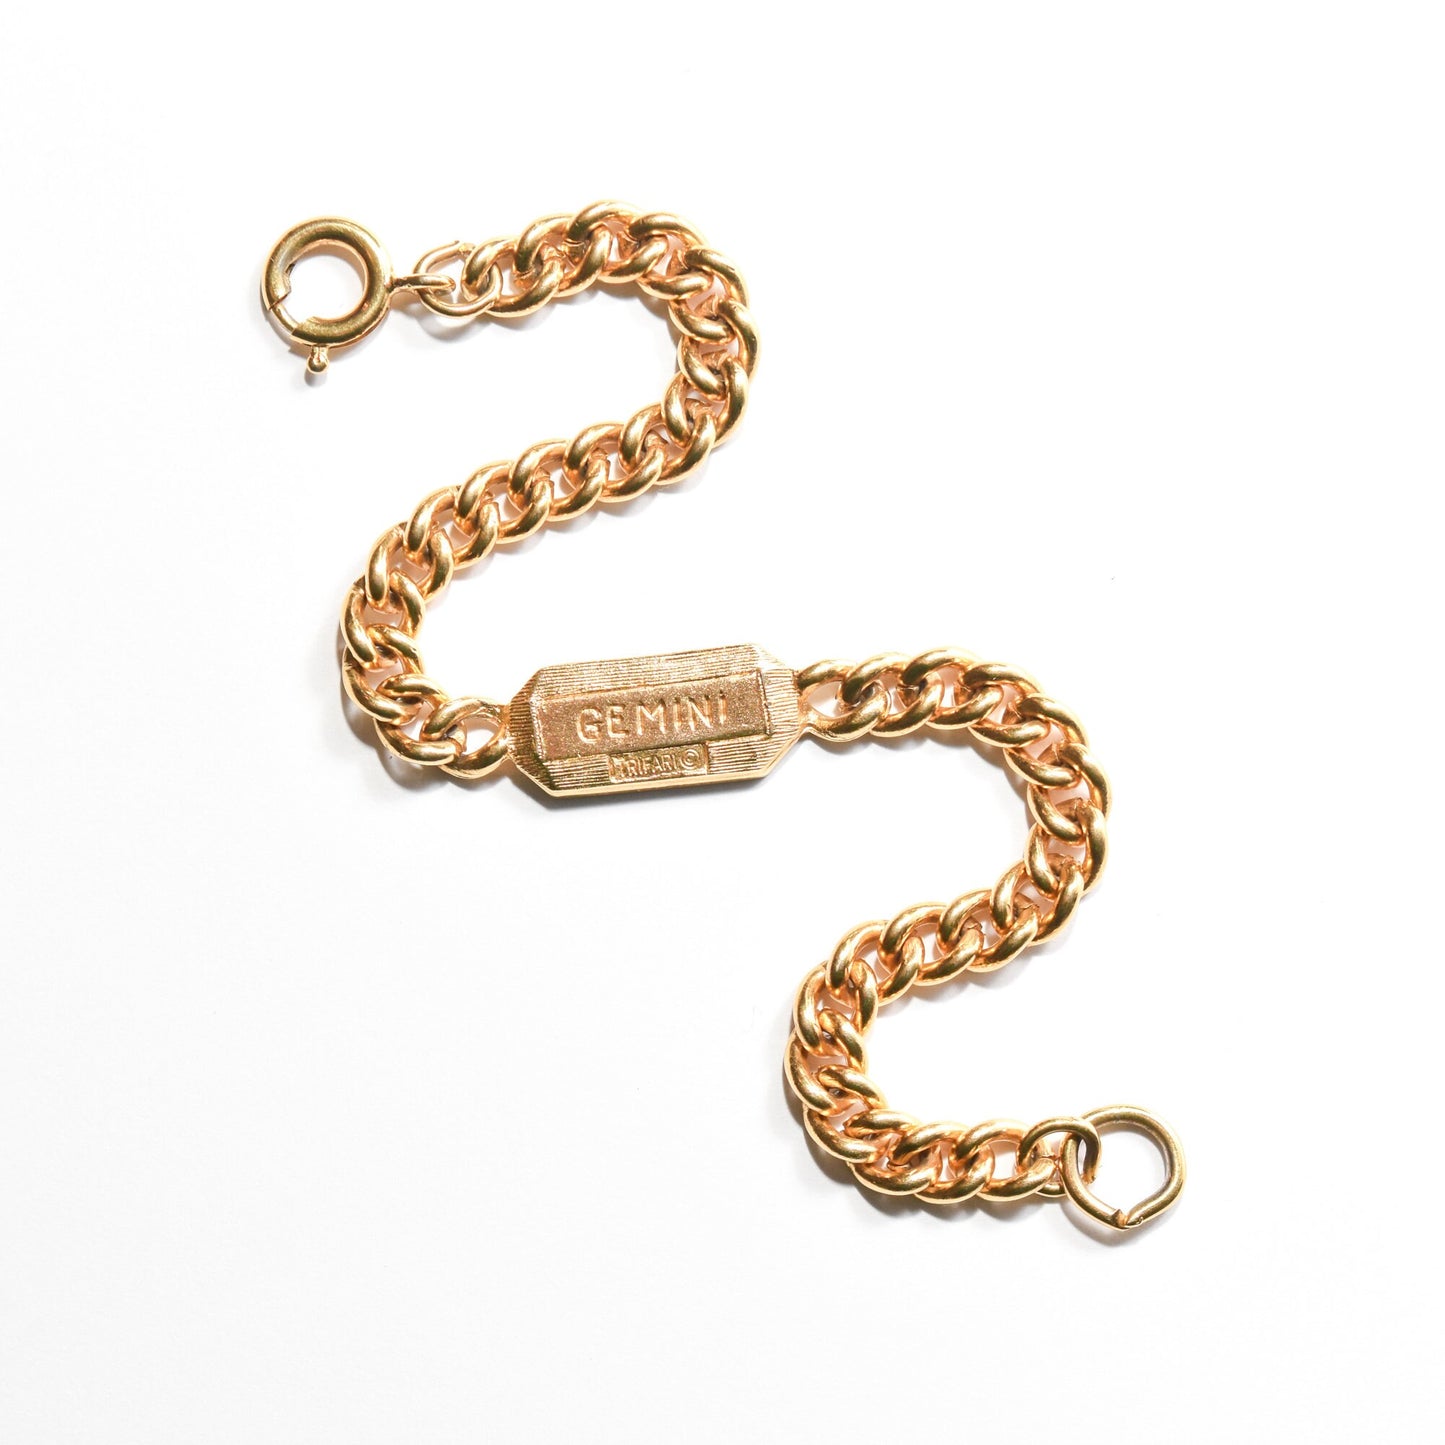 Vintage Trifari Gemini zodiac sign bracelet in gold tone with 5mm curb link chain on a white background, astrology-themed jewelry measuring 7 inches long.